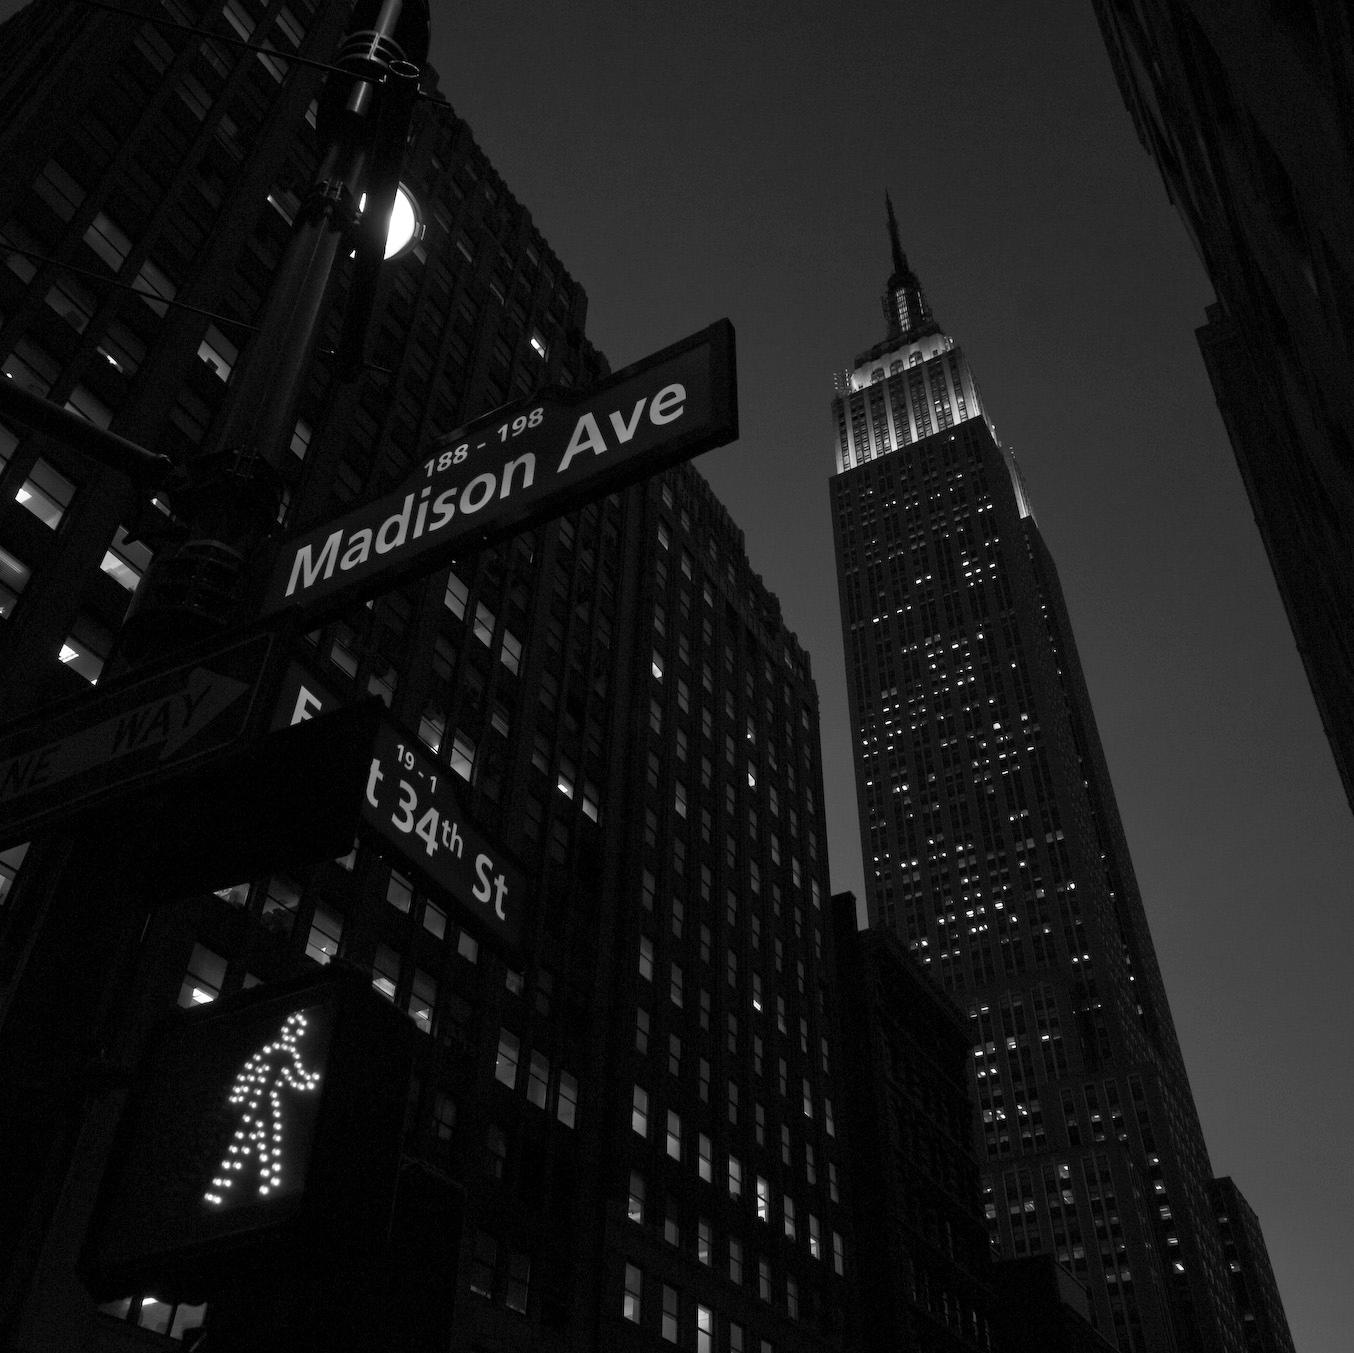 Carlo Bevilacqua Black and White Photograph - NYC Madison Avenue - Empire State Building (from New York series )